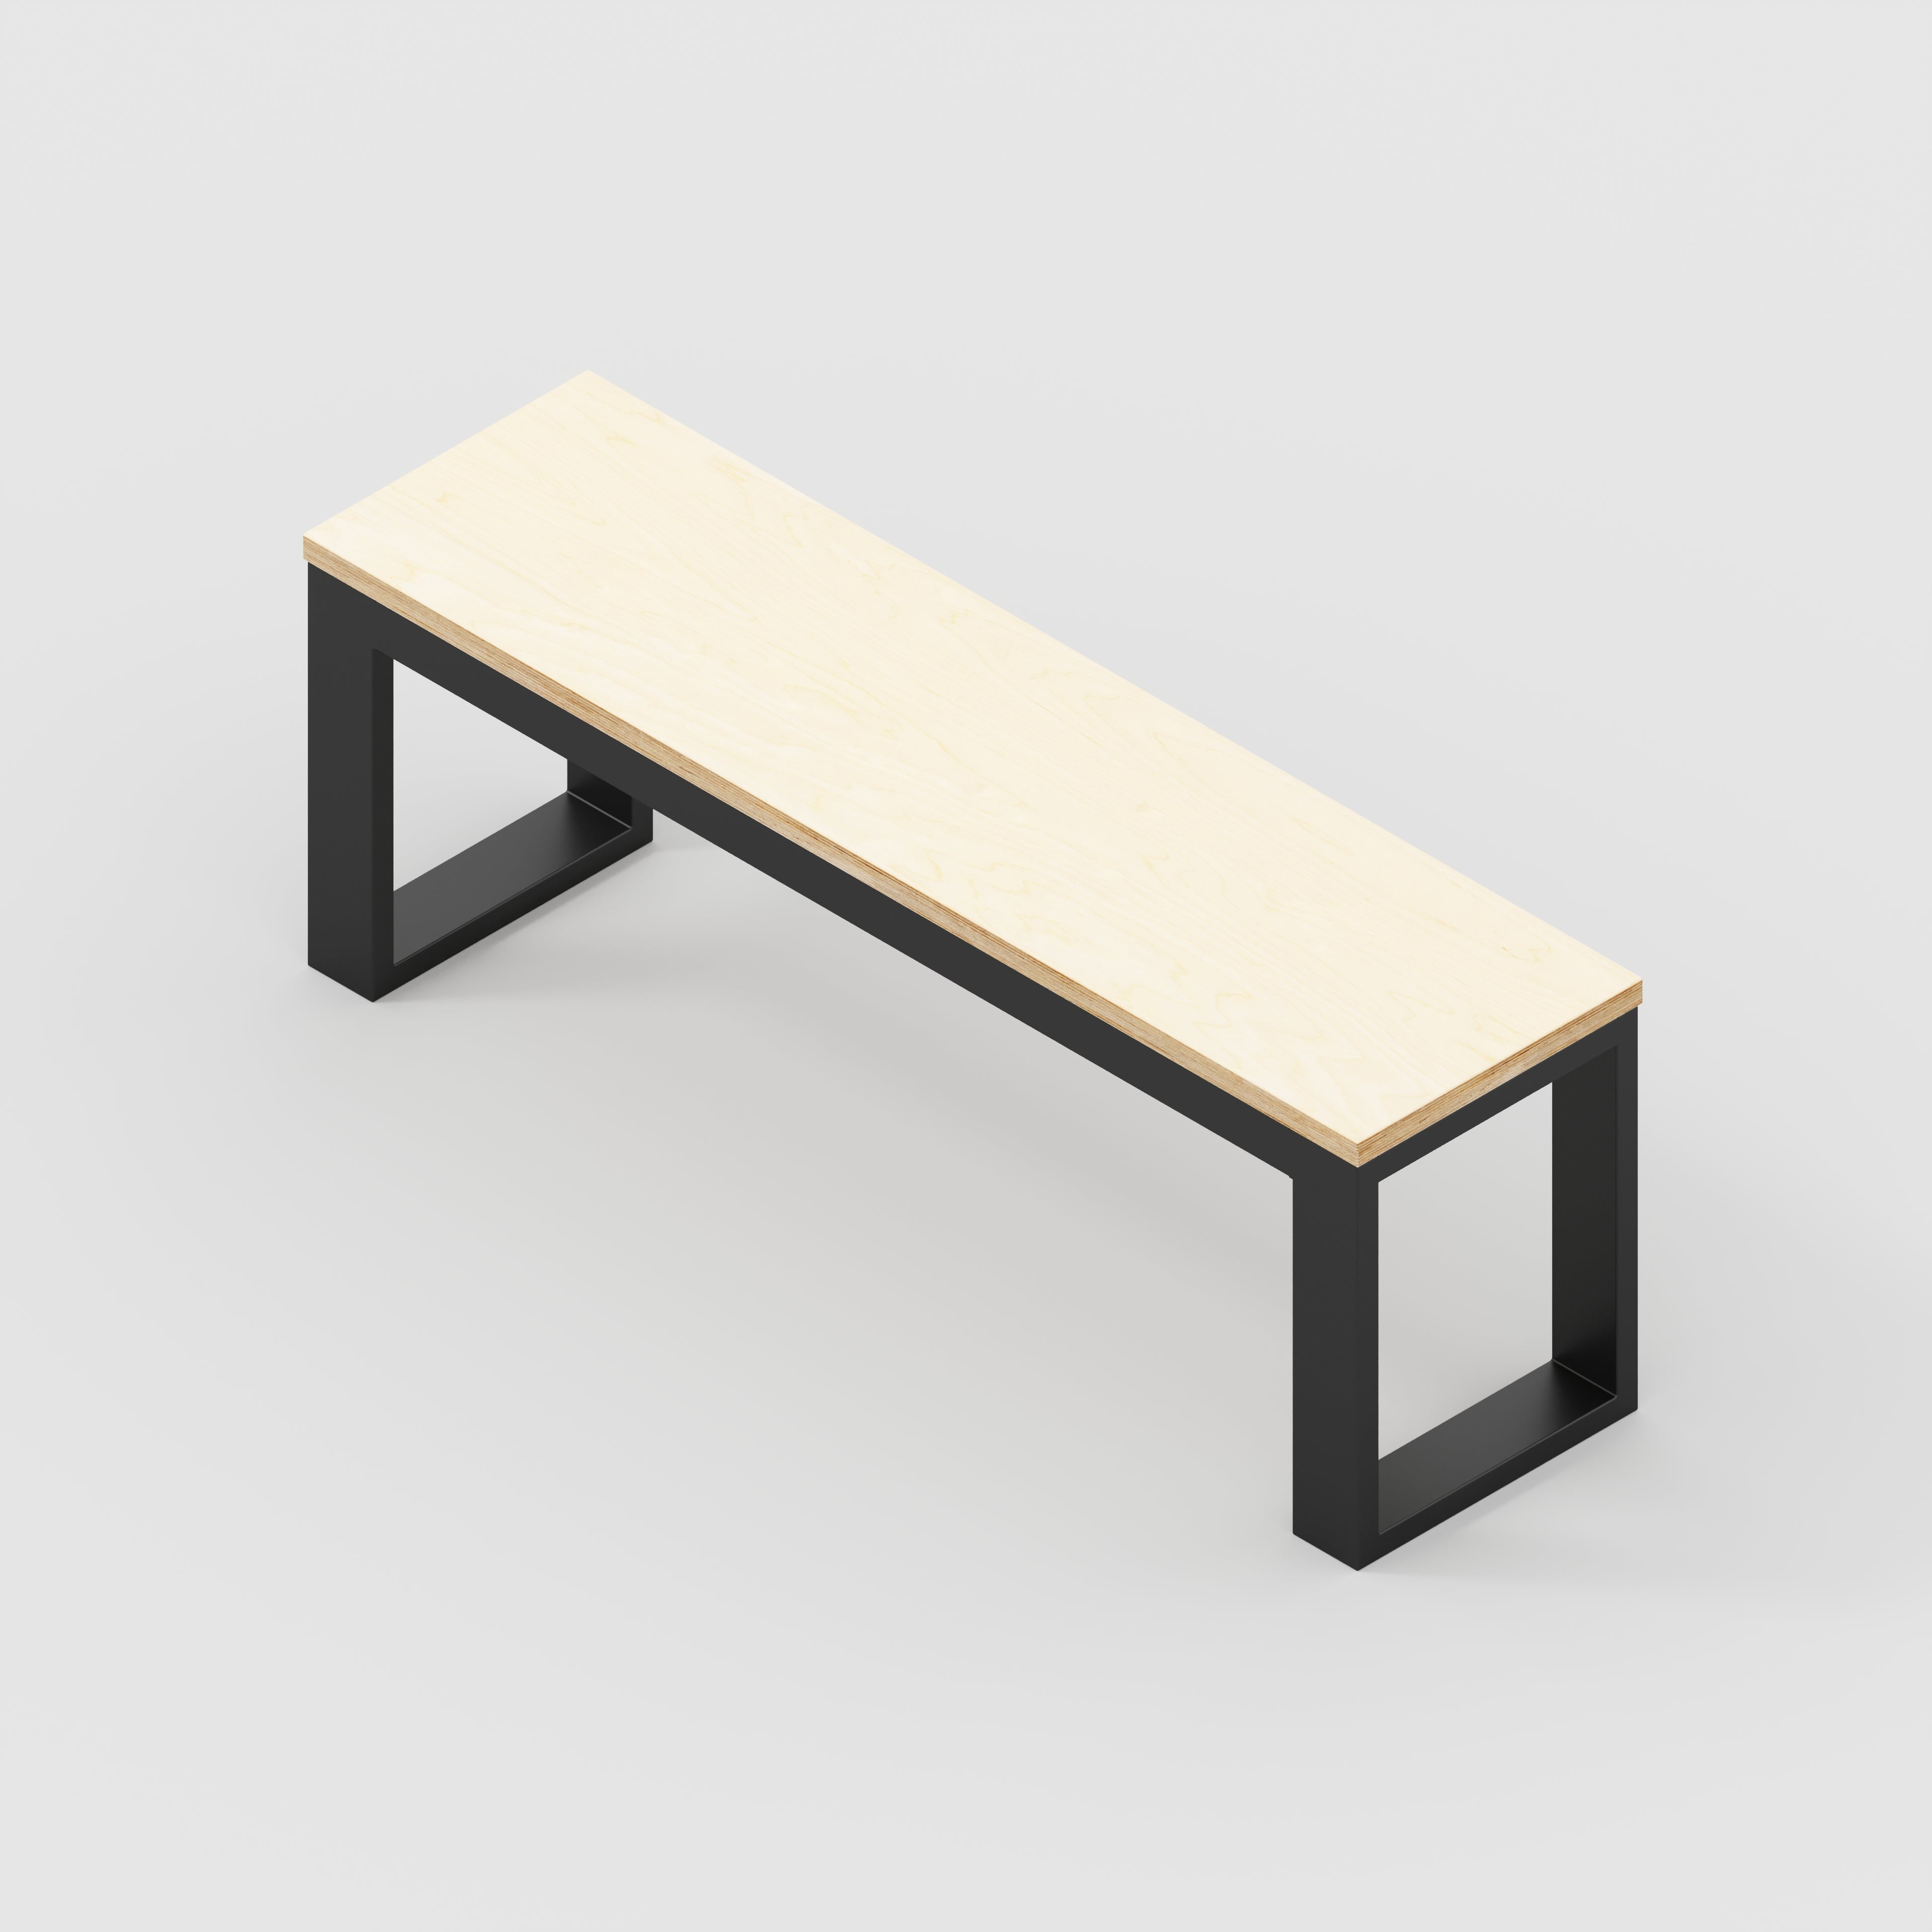 Bench Seat with Black Industrial Frame - Plywood Birch - 1200(w) x 325(d)